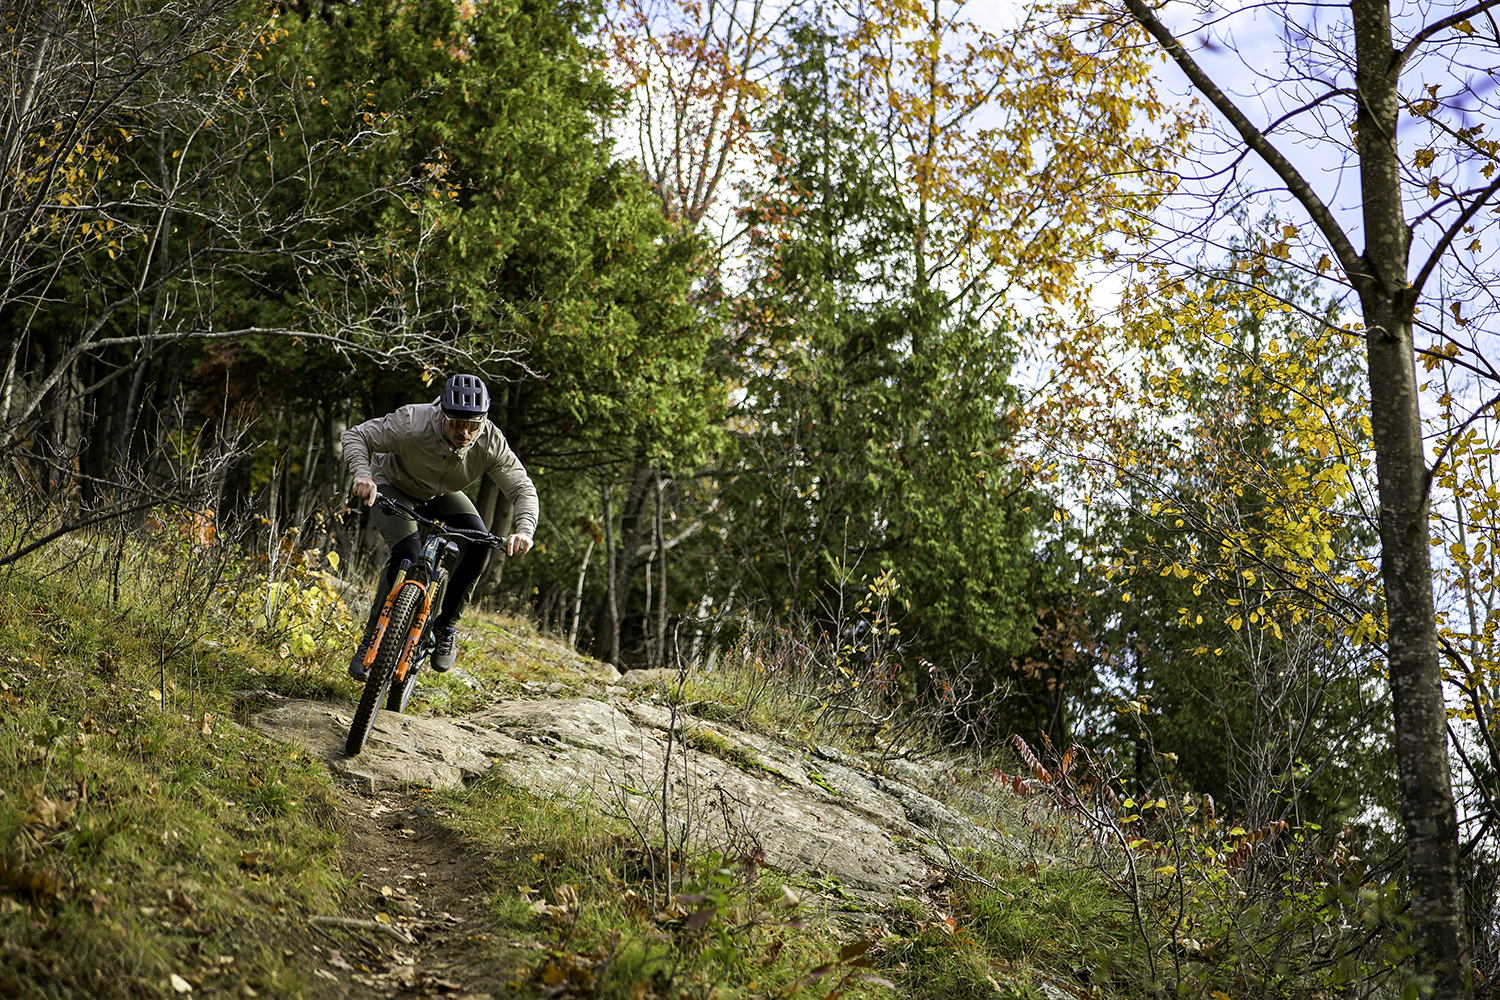 "Brice Shirbach coasting through a rocky section of trail."